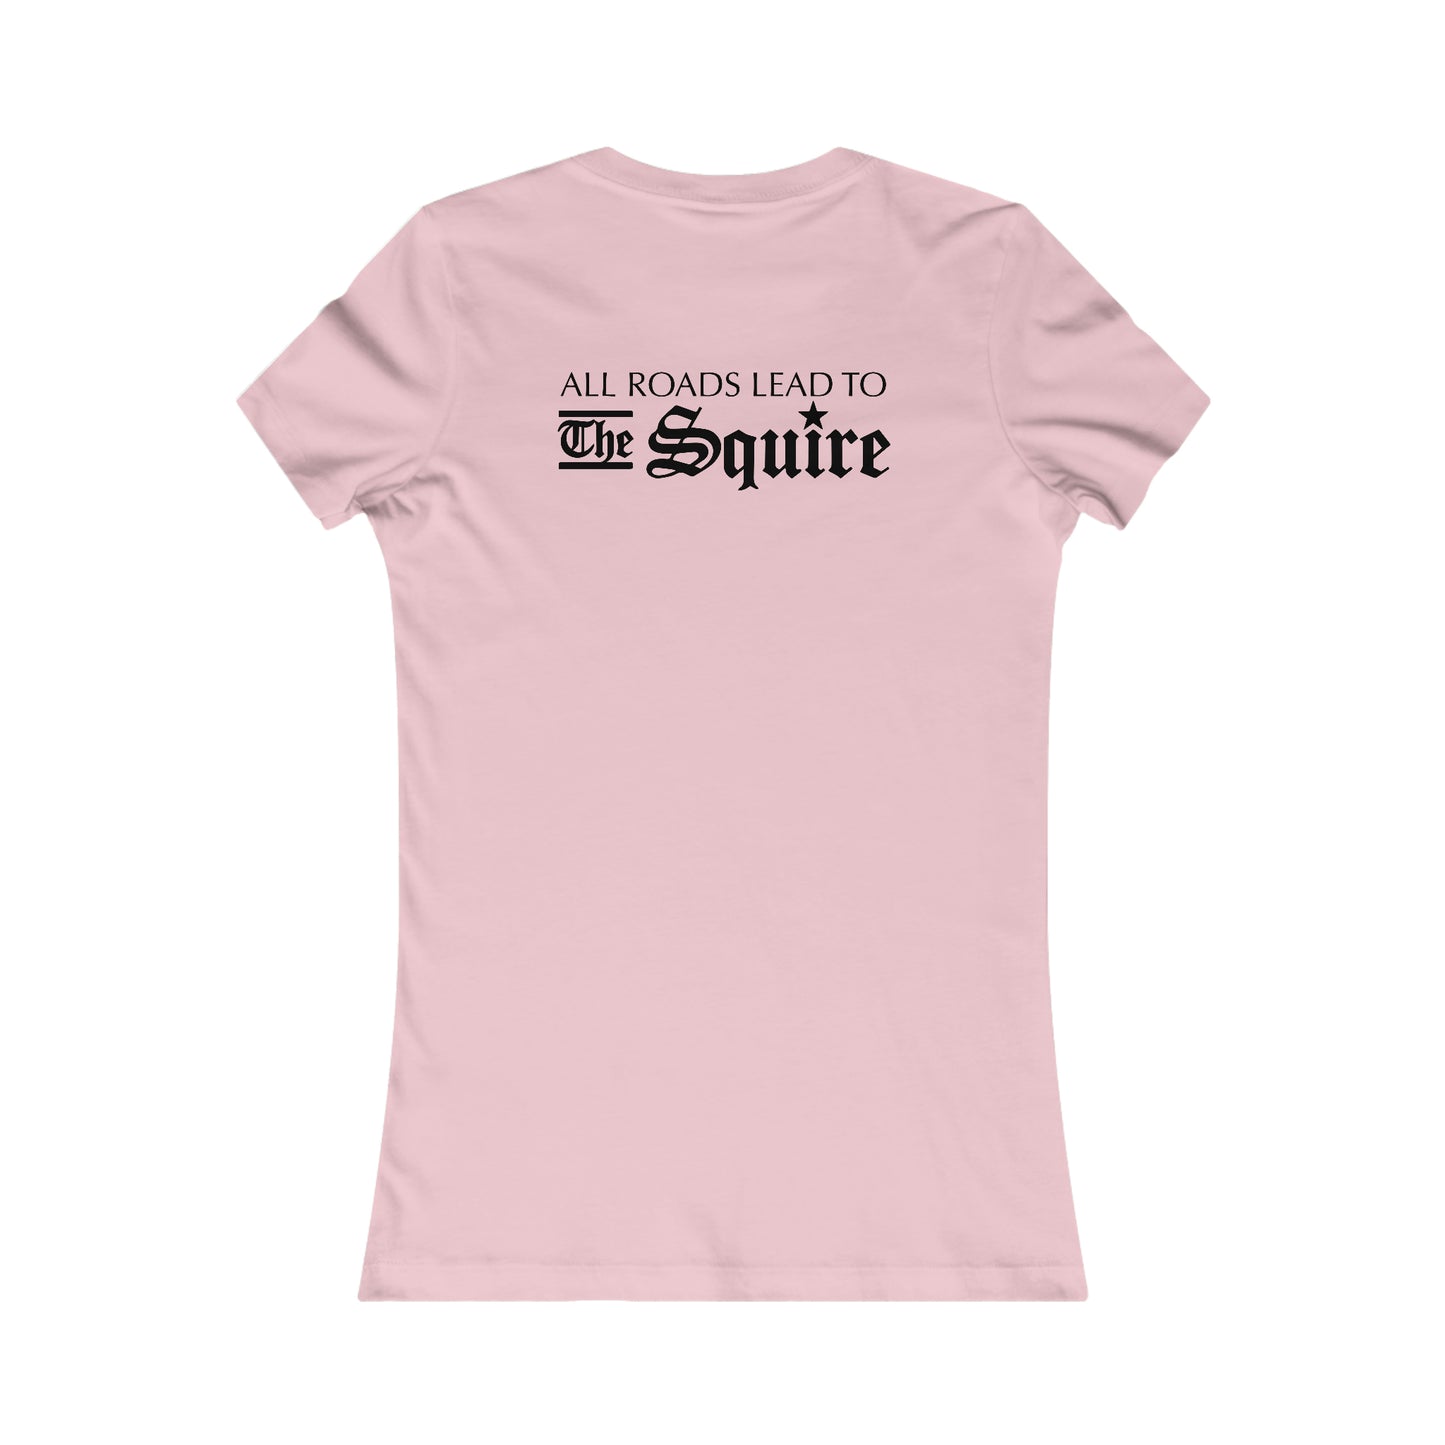 The Squire Women's Slim Fit Tee